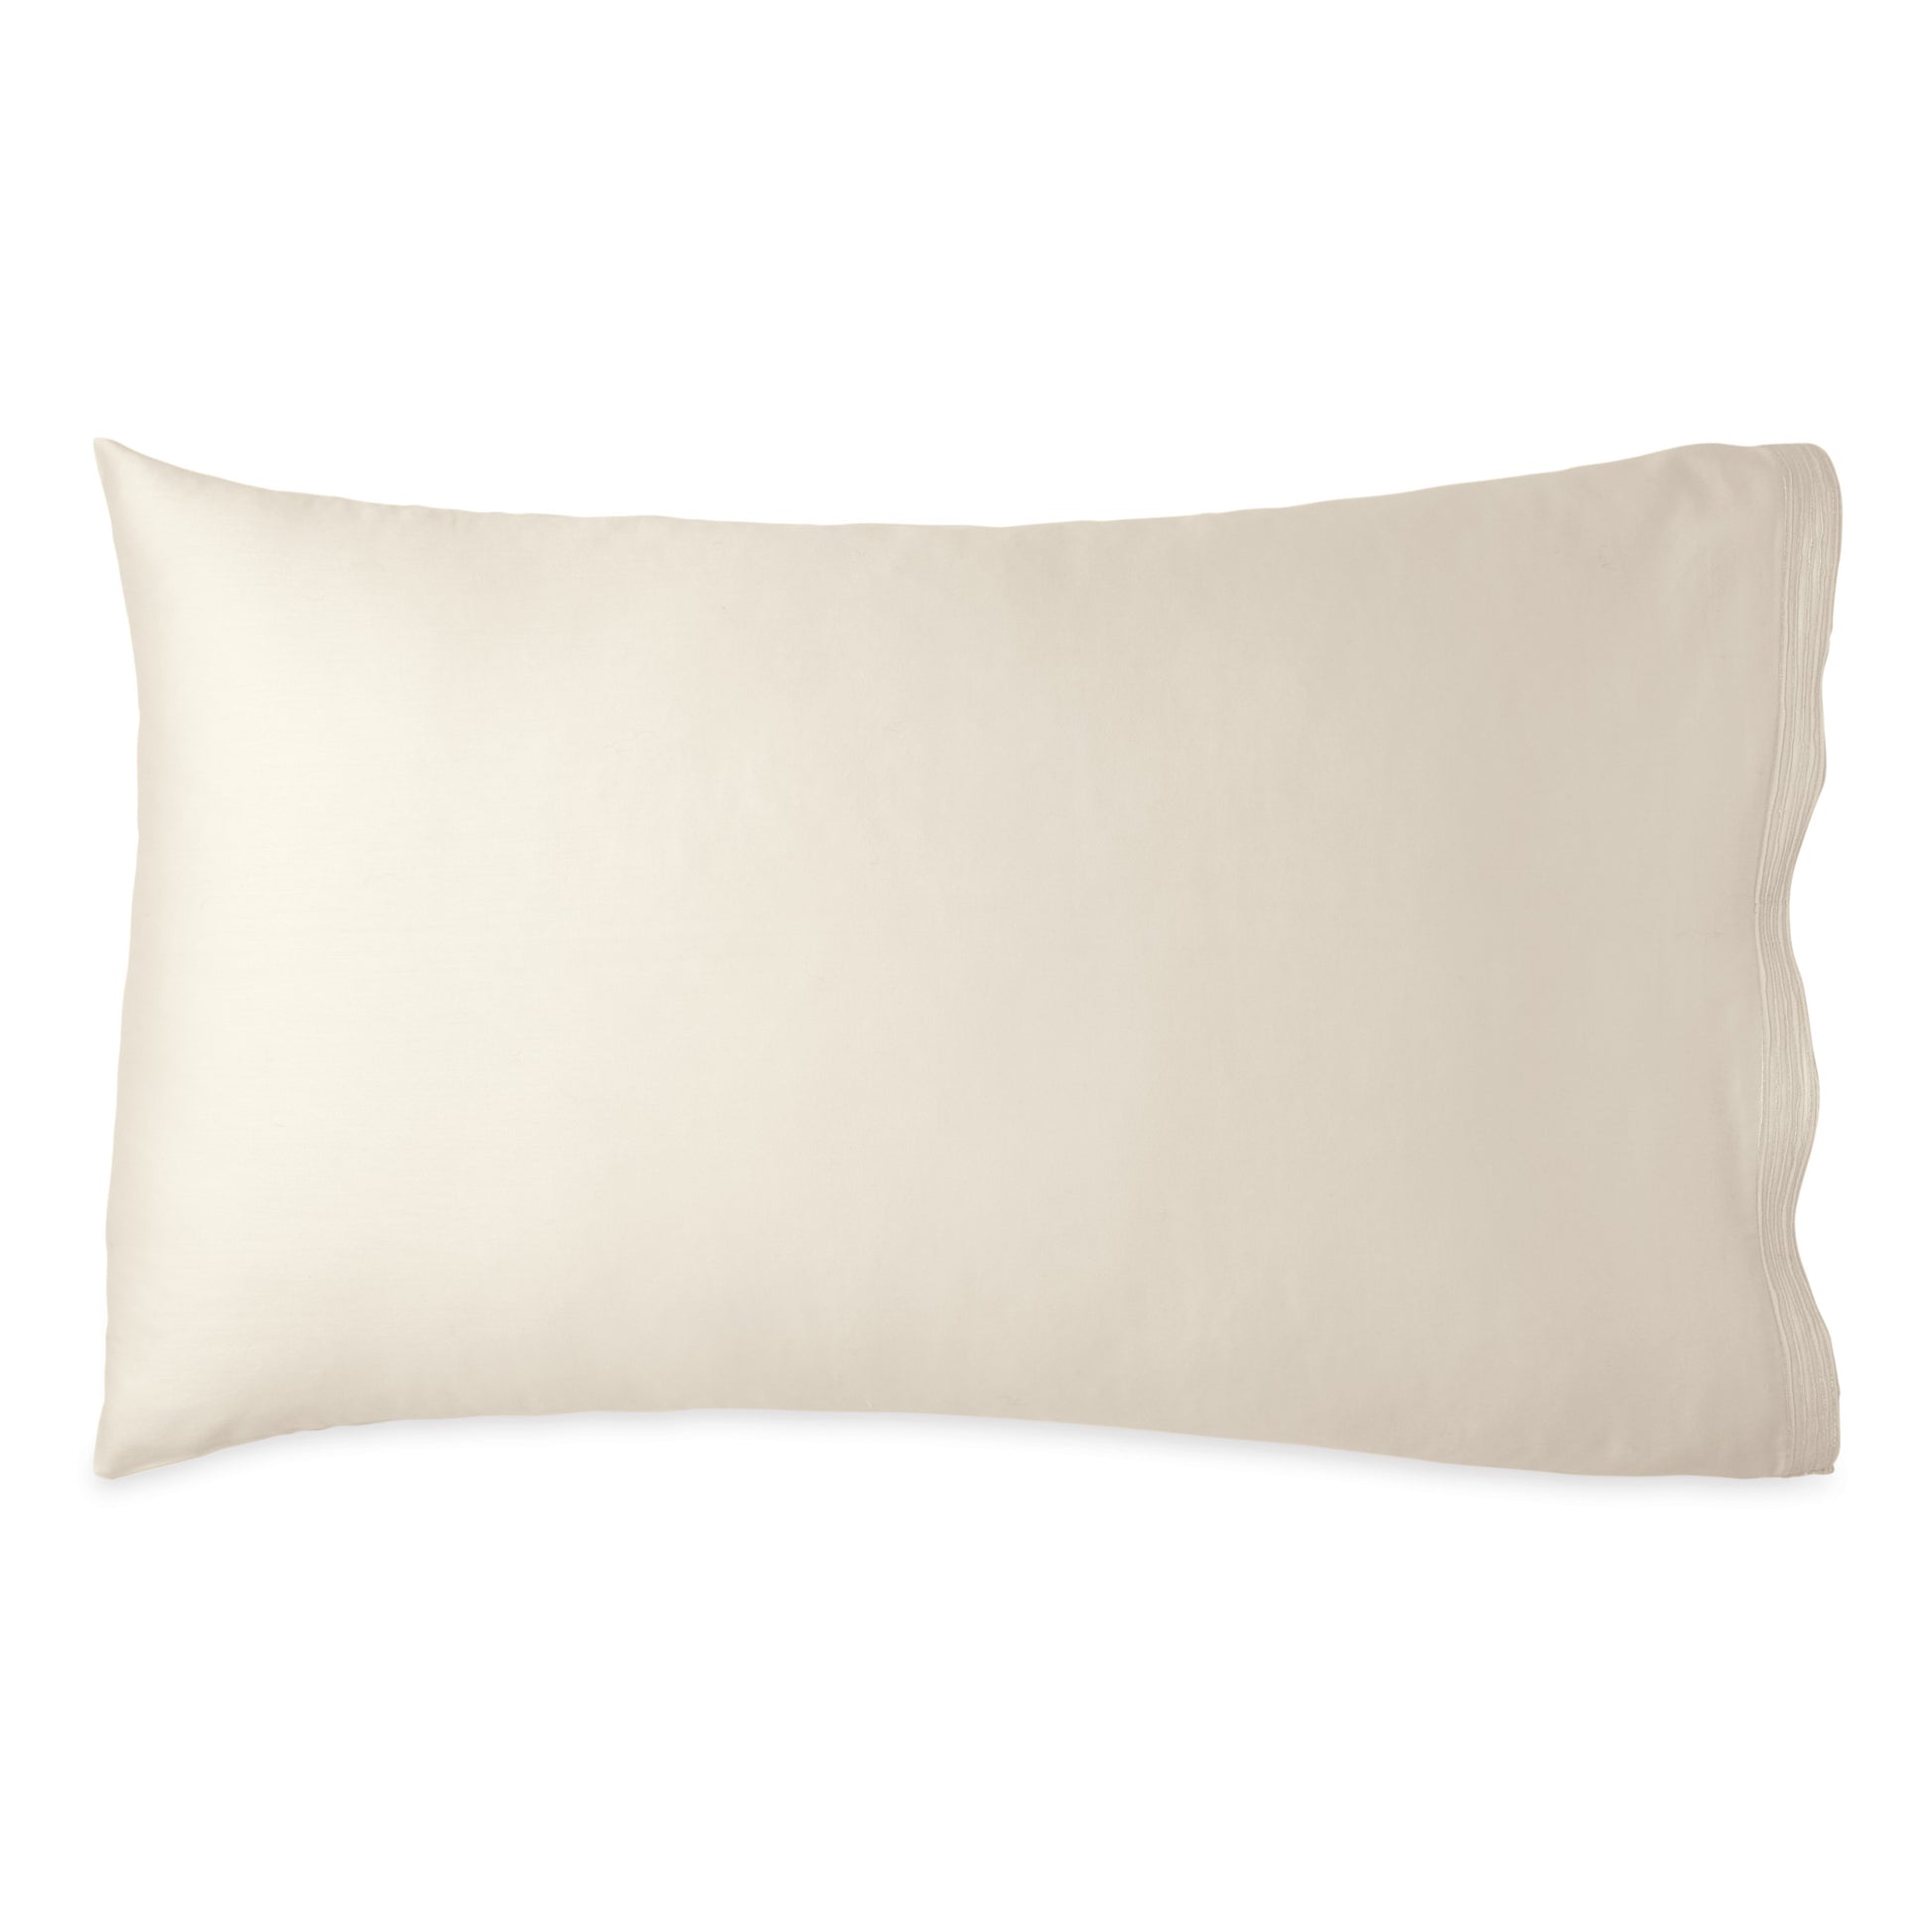 Michael Aram Enchanted Sheet Collection Ivory